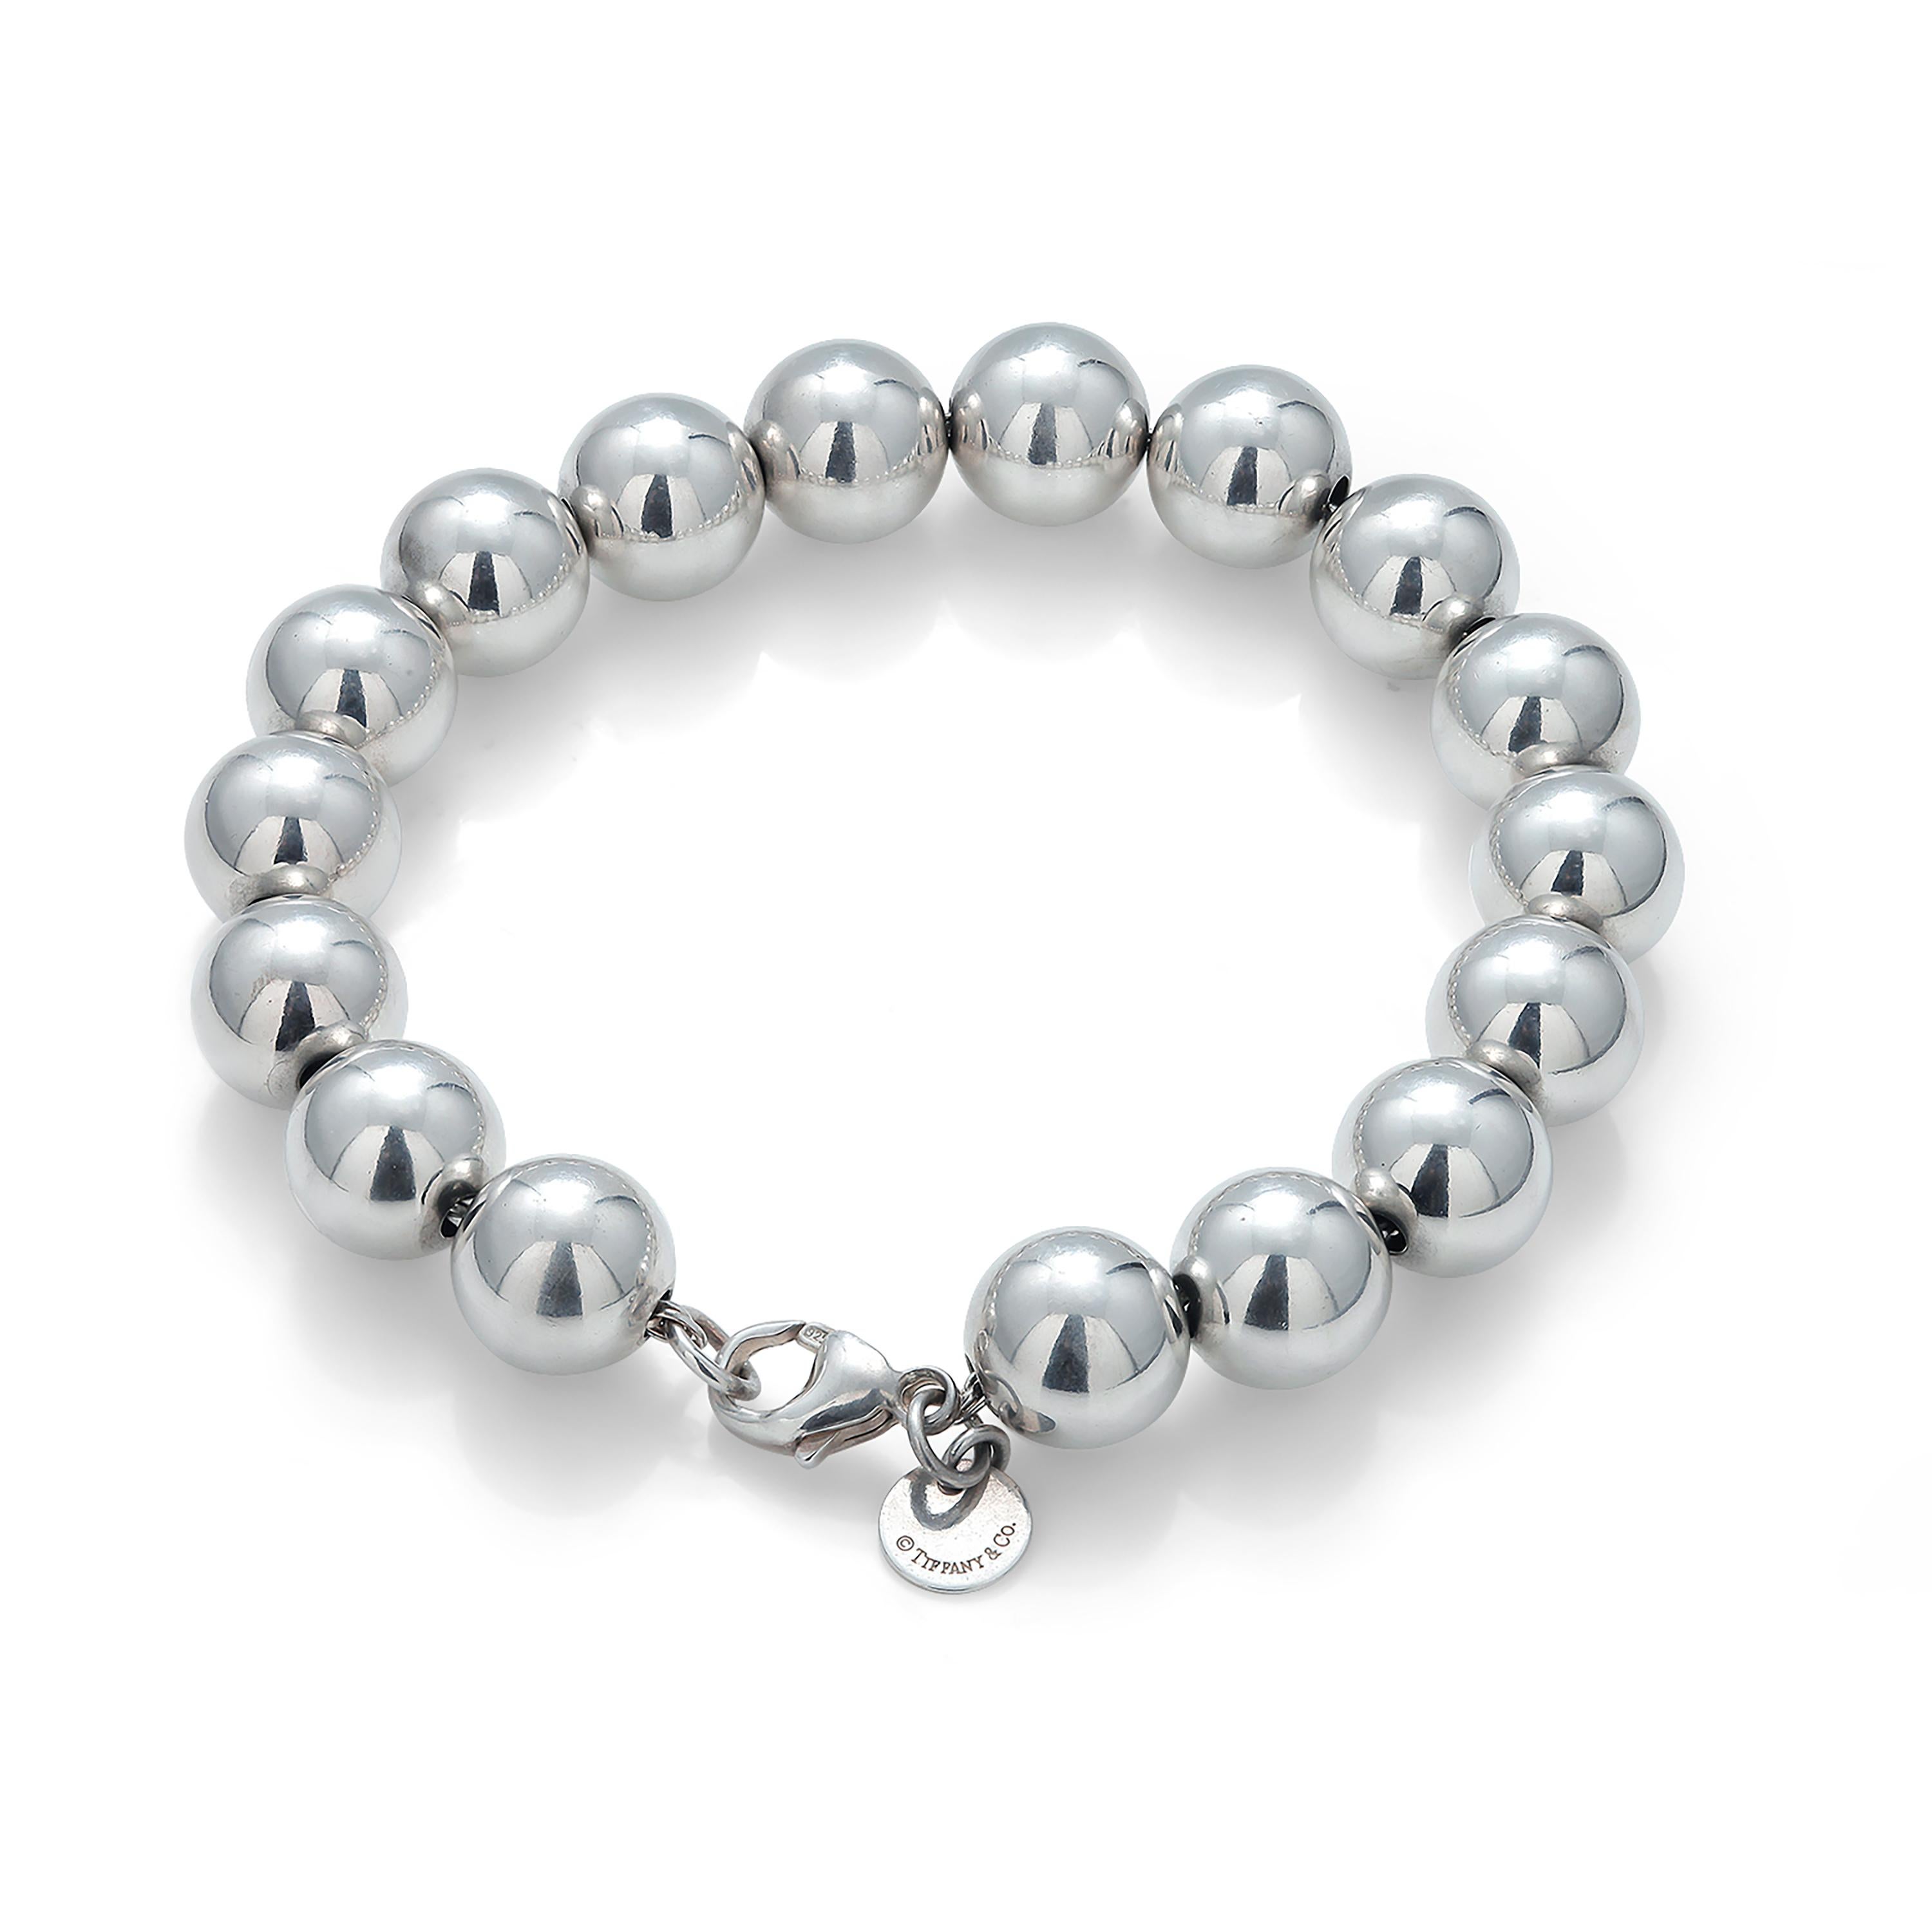 Tiffany & Co sterling silver bead 7 inch bracelet
Markings Tiffany & Co 925
Bracelet weighing 17.3 grams
Beads measuring 9.8 millimeter, 0.40 inch each
In excellent condition, like new
Designed to be comfortable and easy to wear
According to the